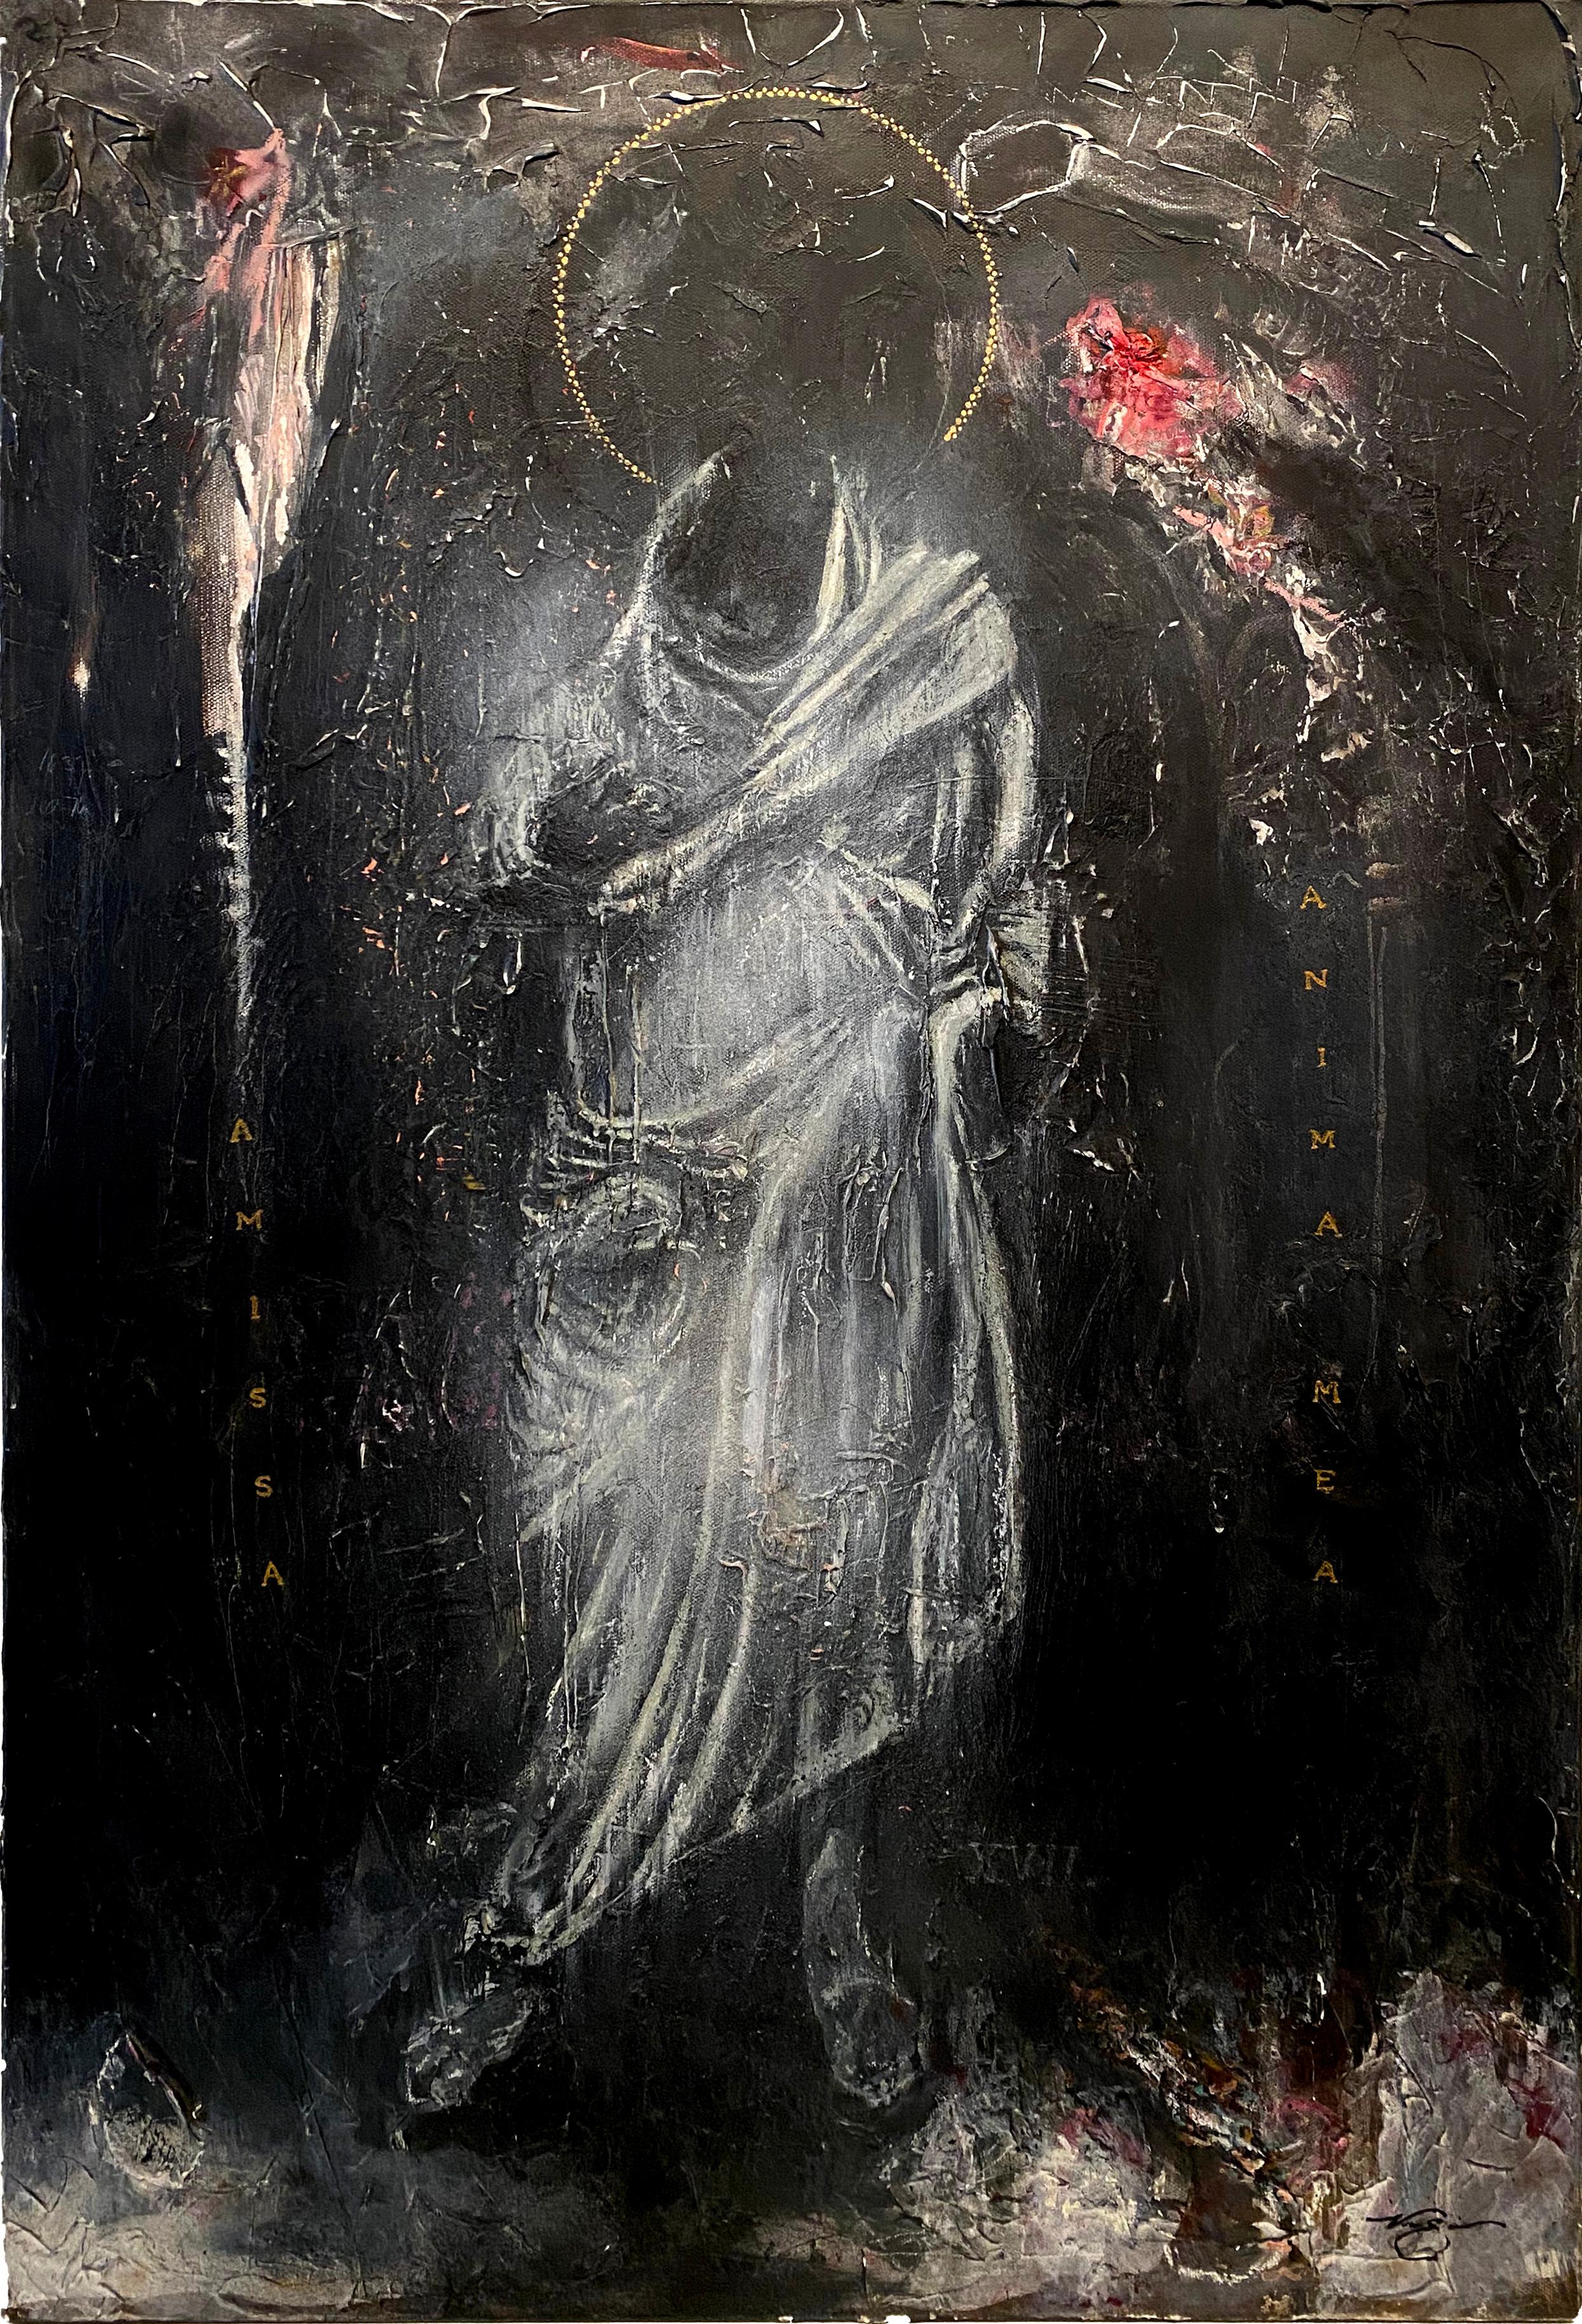 Nicholas Evans Figurative Painting - “Spectre” (Contemporary, Cerebral, Figurative, Black Canvas Painting with Type) 